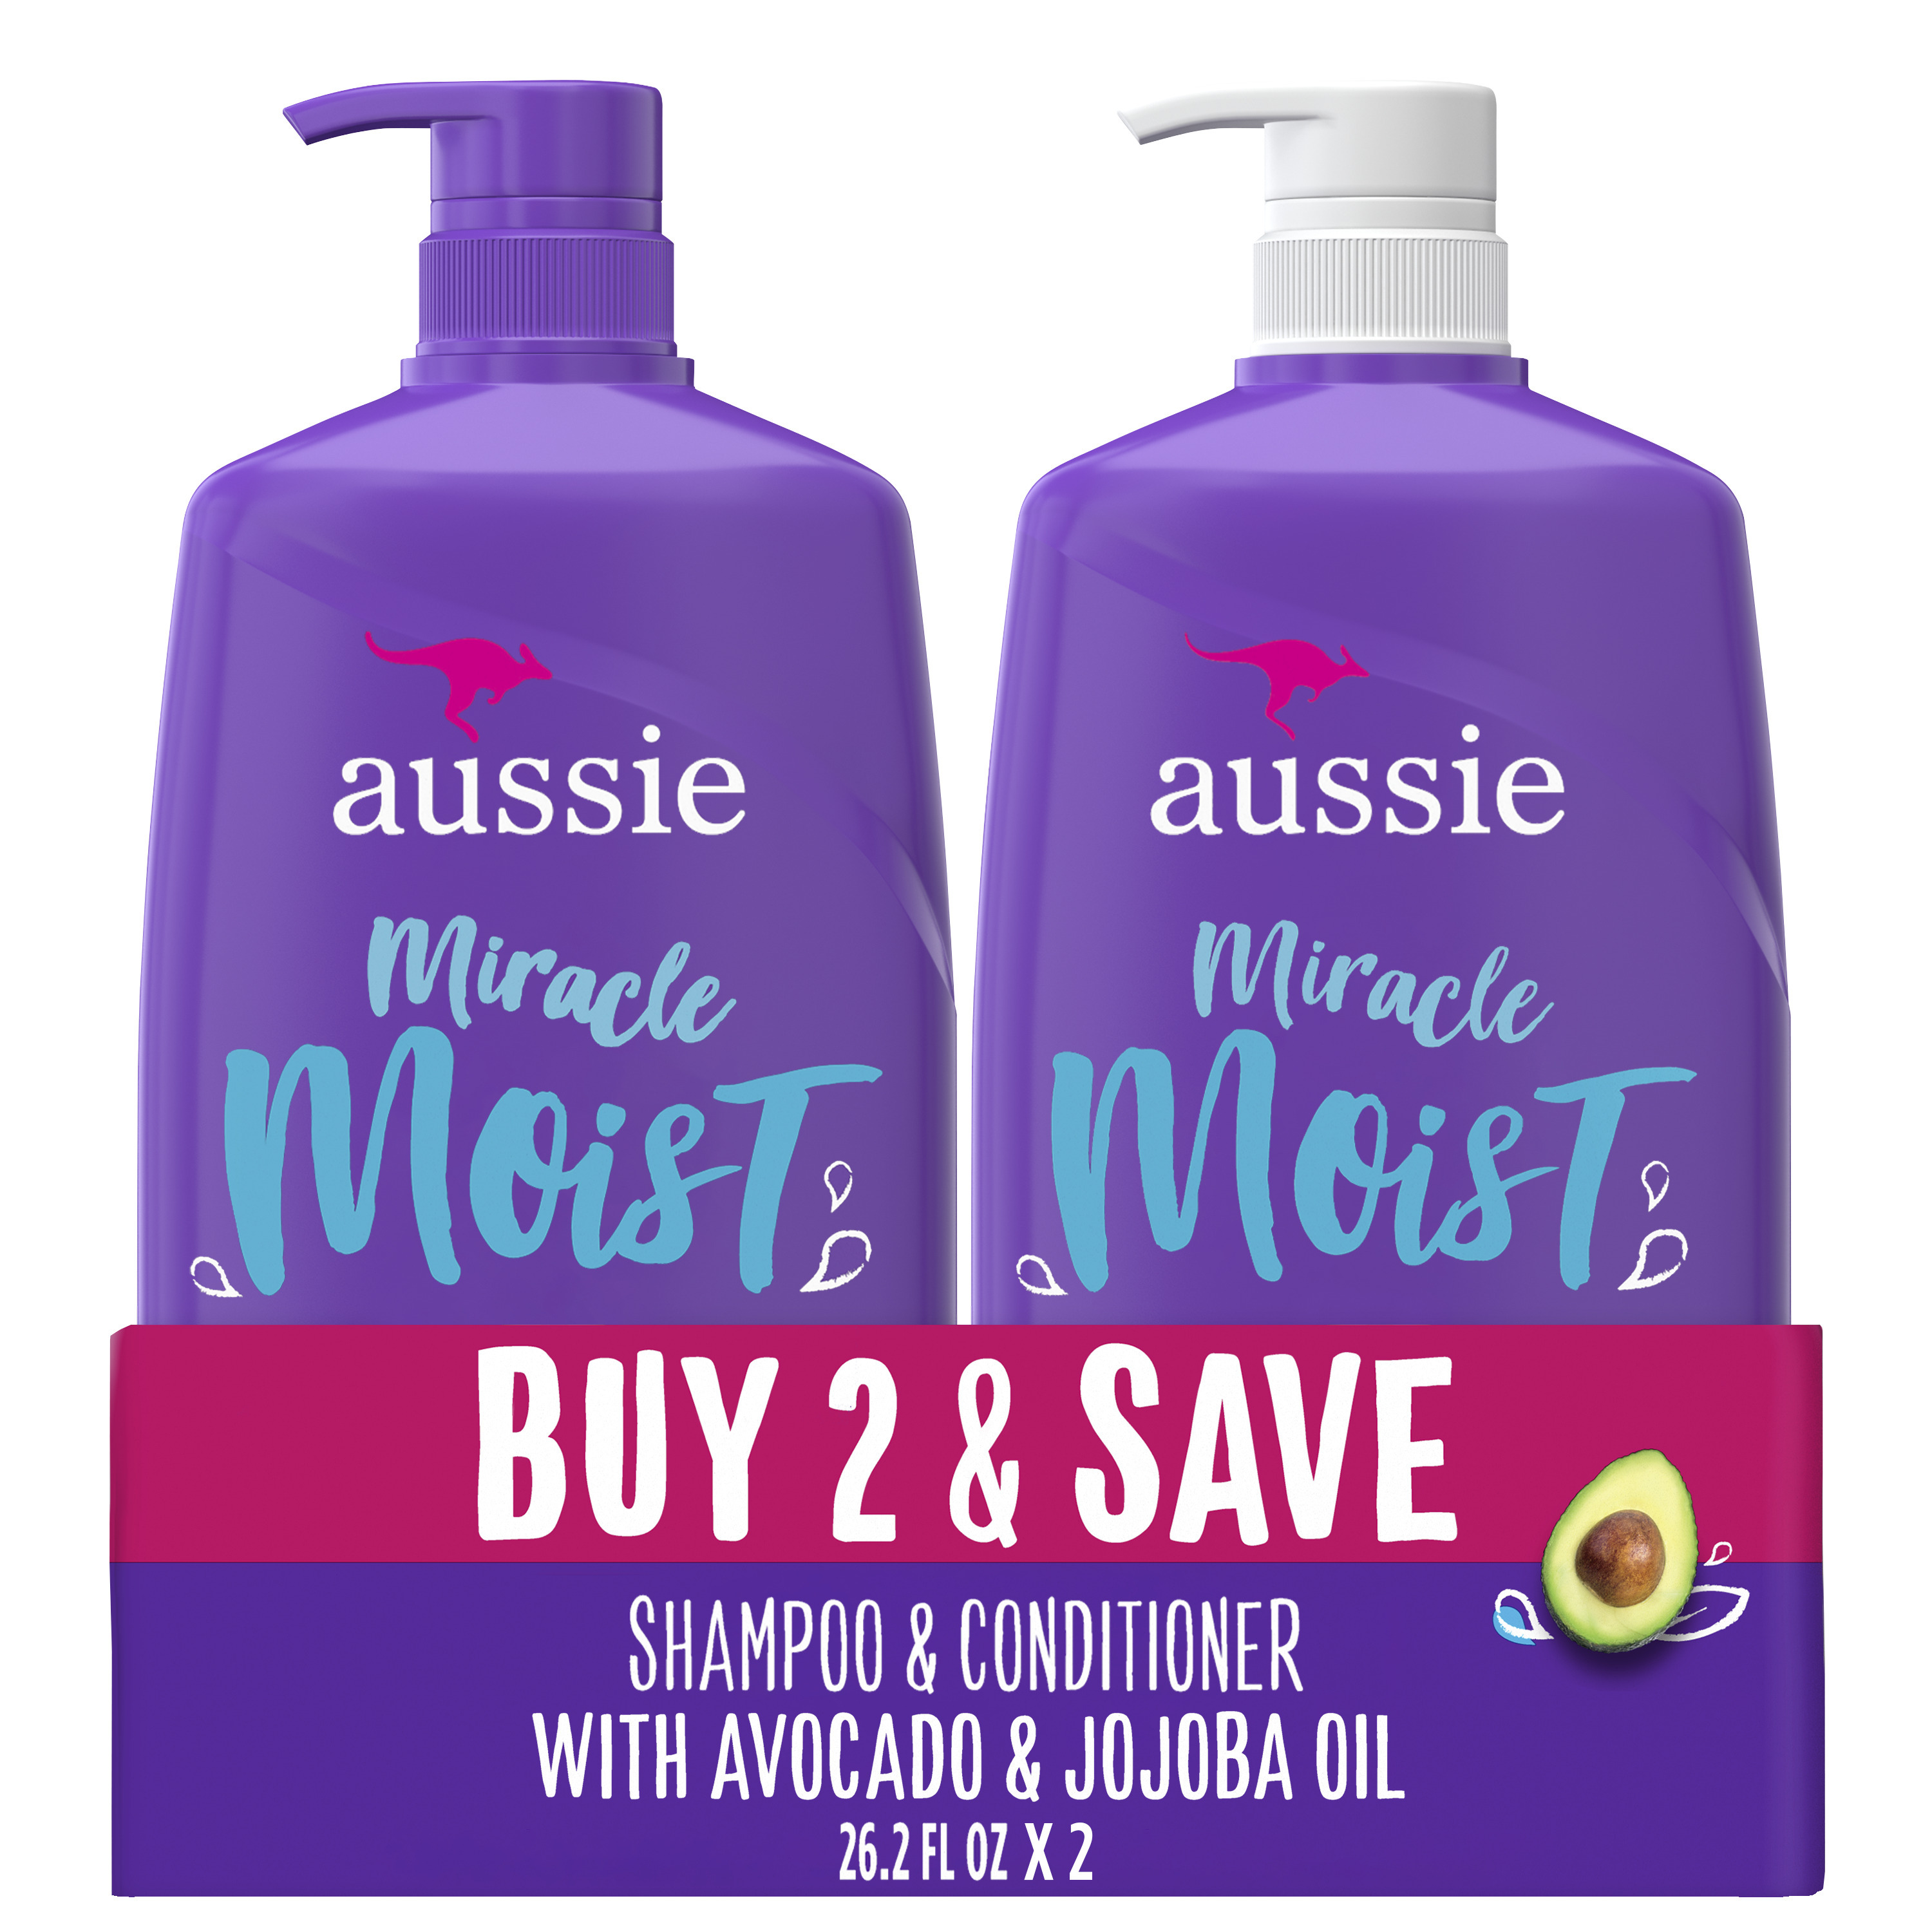 Aussie Miracle Moist Shampoo and Conditioner Hair Set, 26.2 fl oz - image 1 of 9